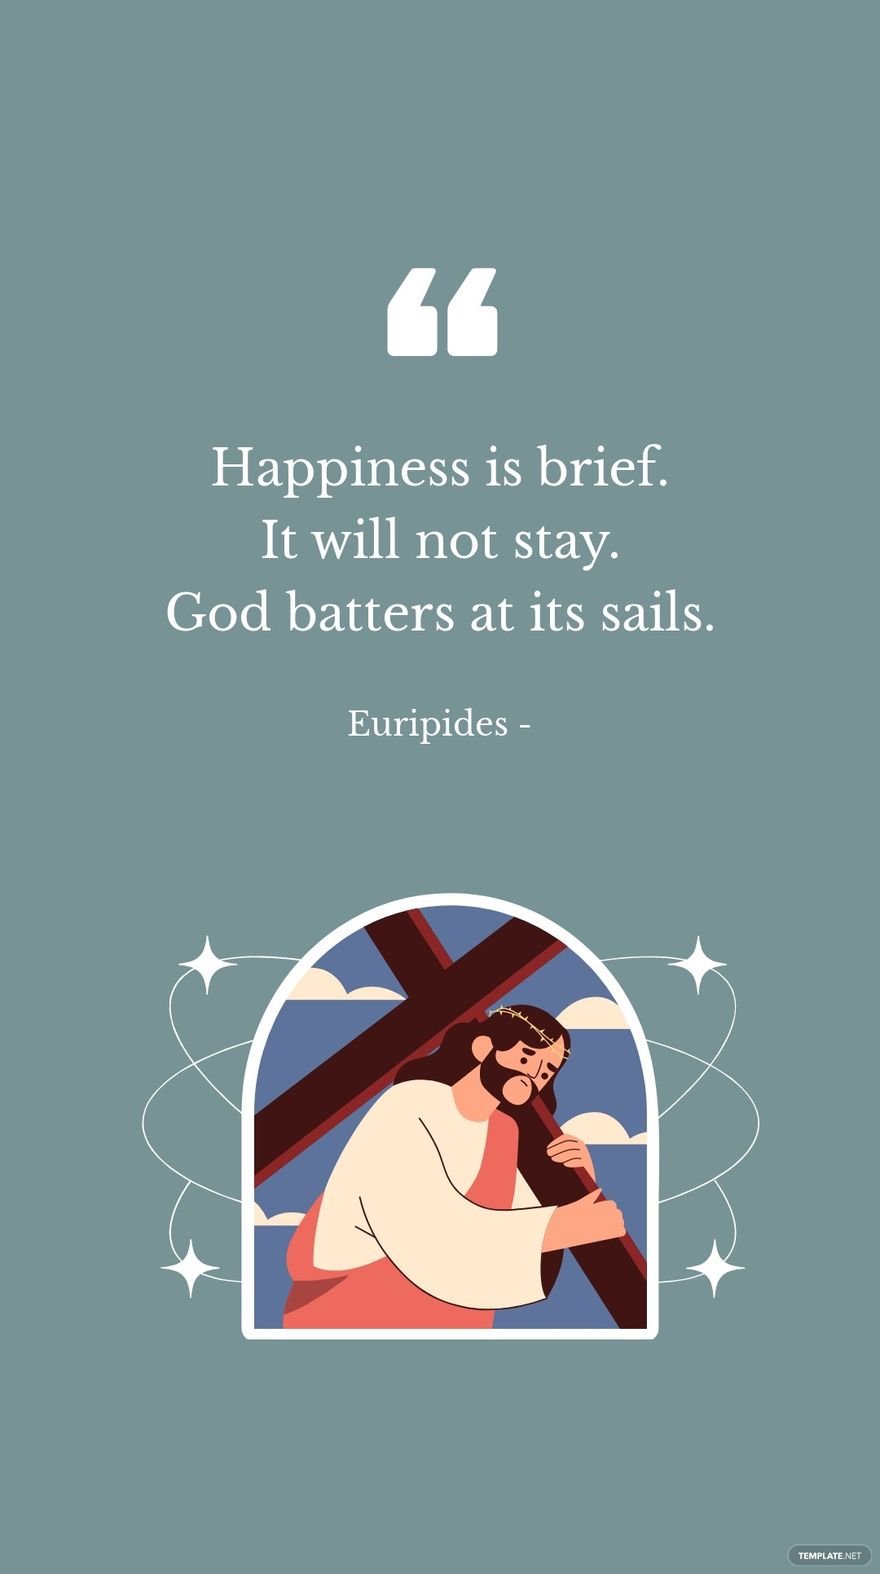 Free Euripides - Happiness is brief. It will not stay. God batters at its sails. in JPG